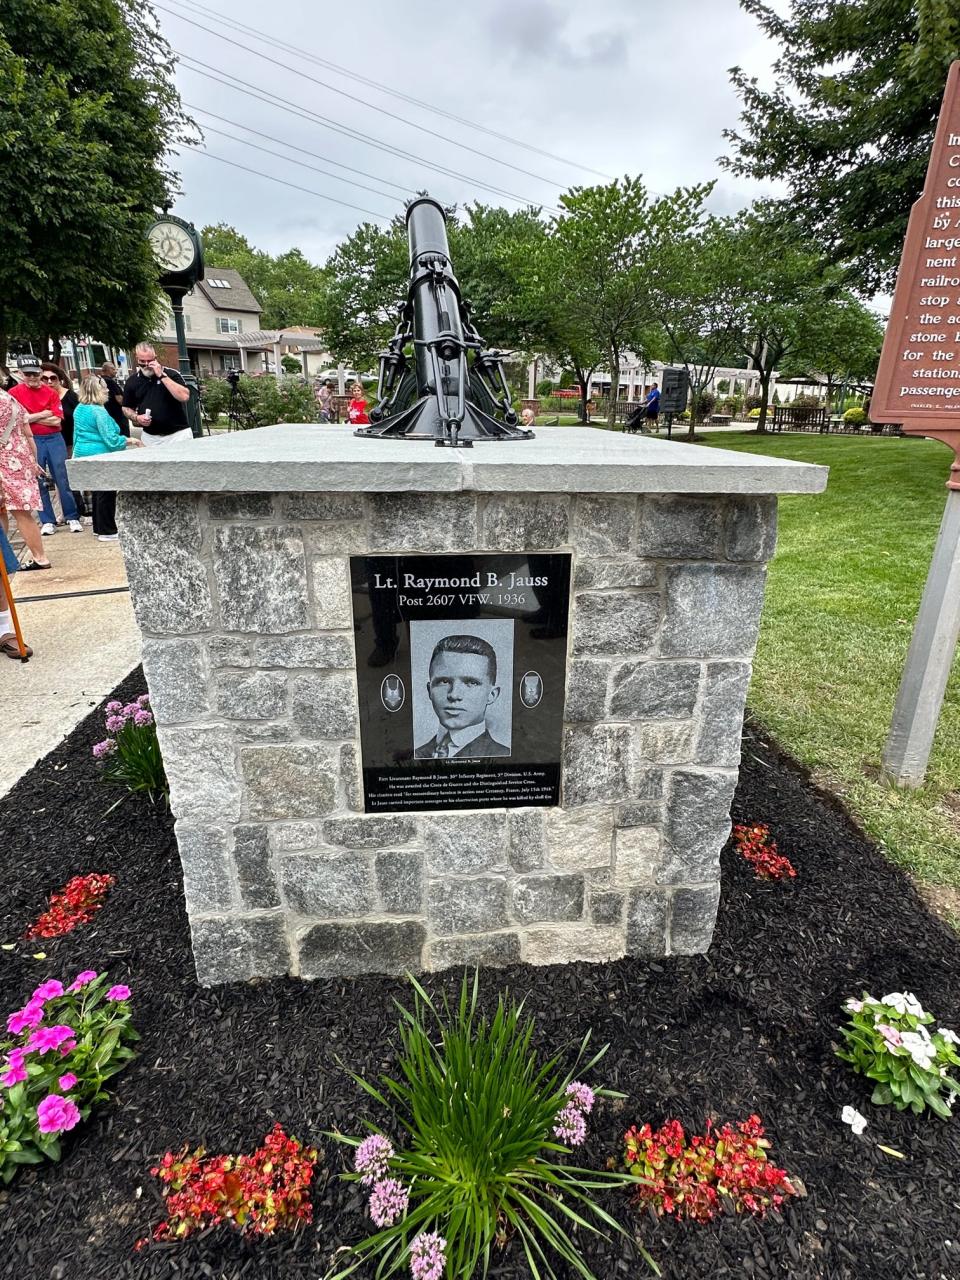 The newly renovated monument honoring World War I veteran Lt. Raymond B. Jauss at Congers Station Park. He received the distinguished service cross posthumously in 1918.